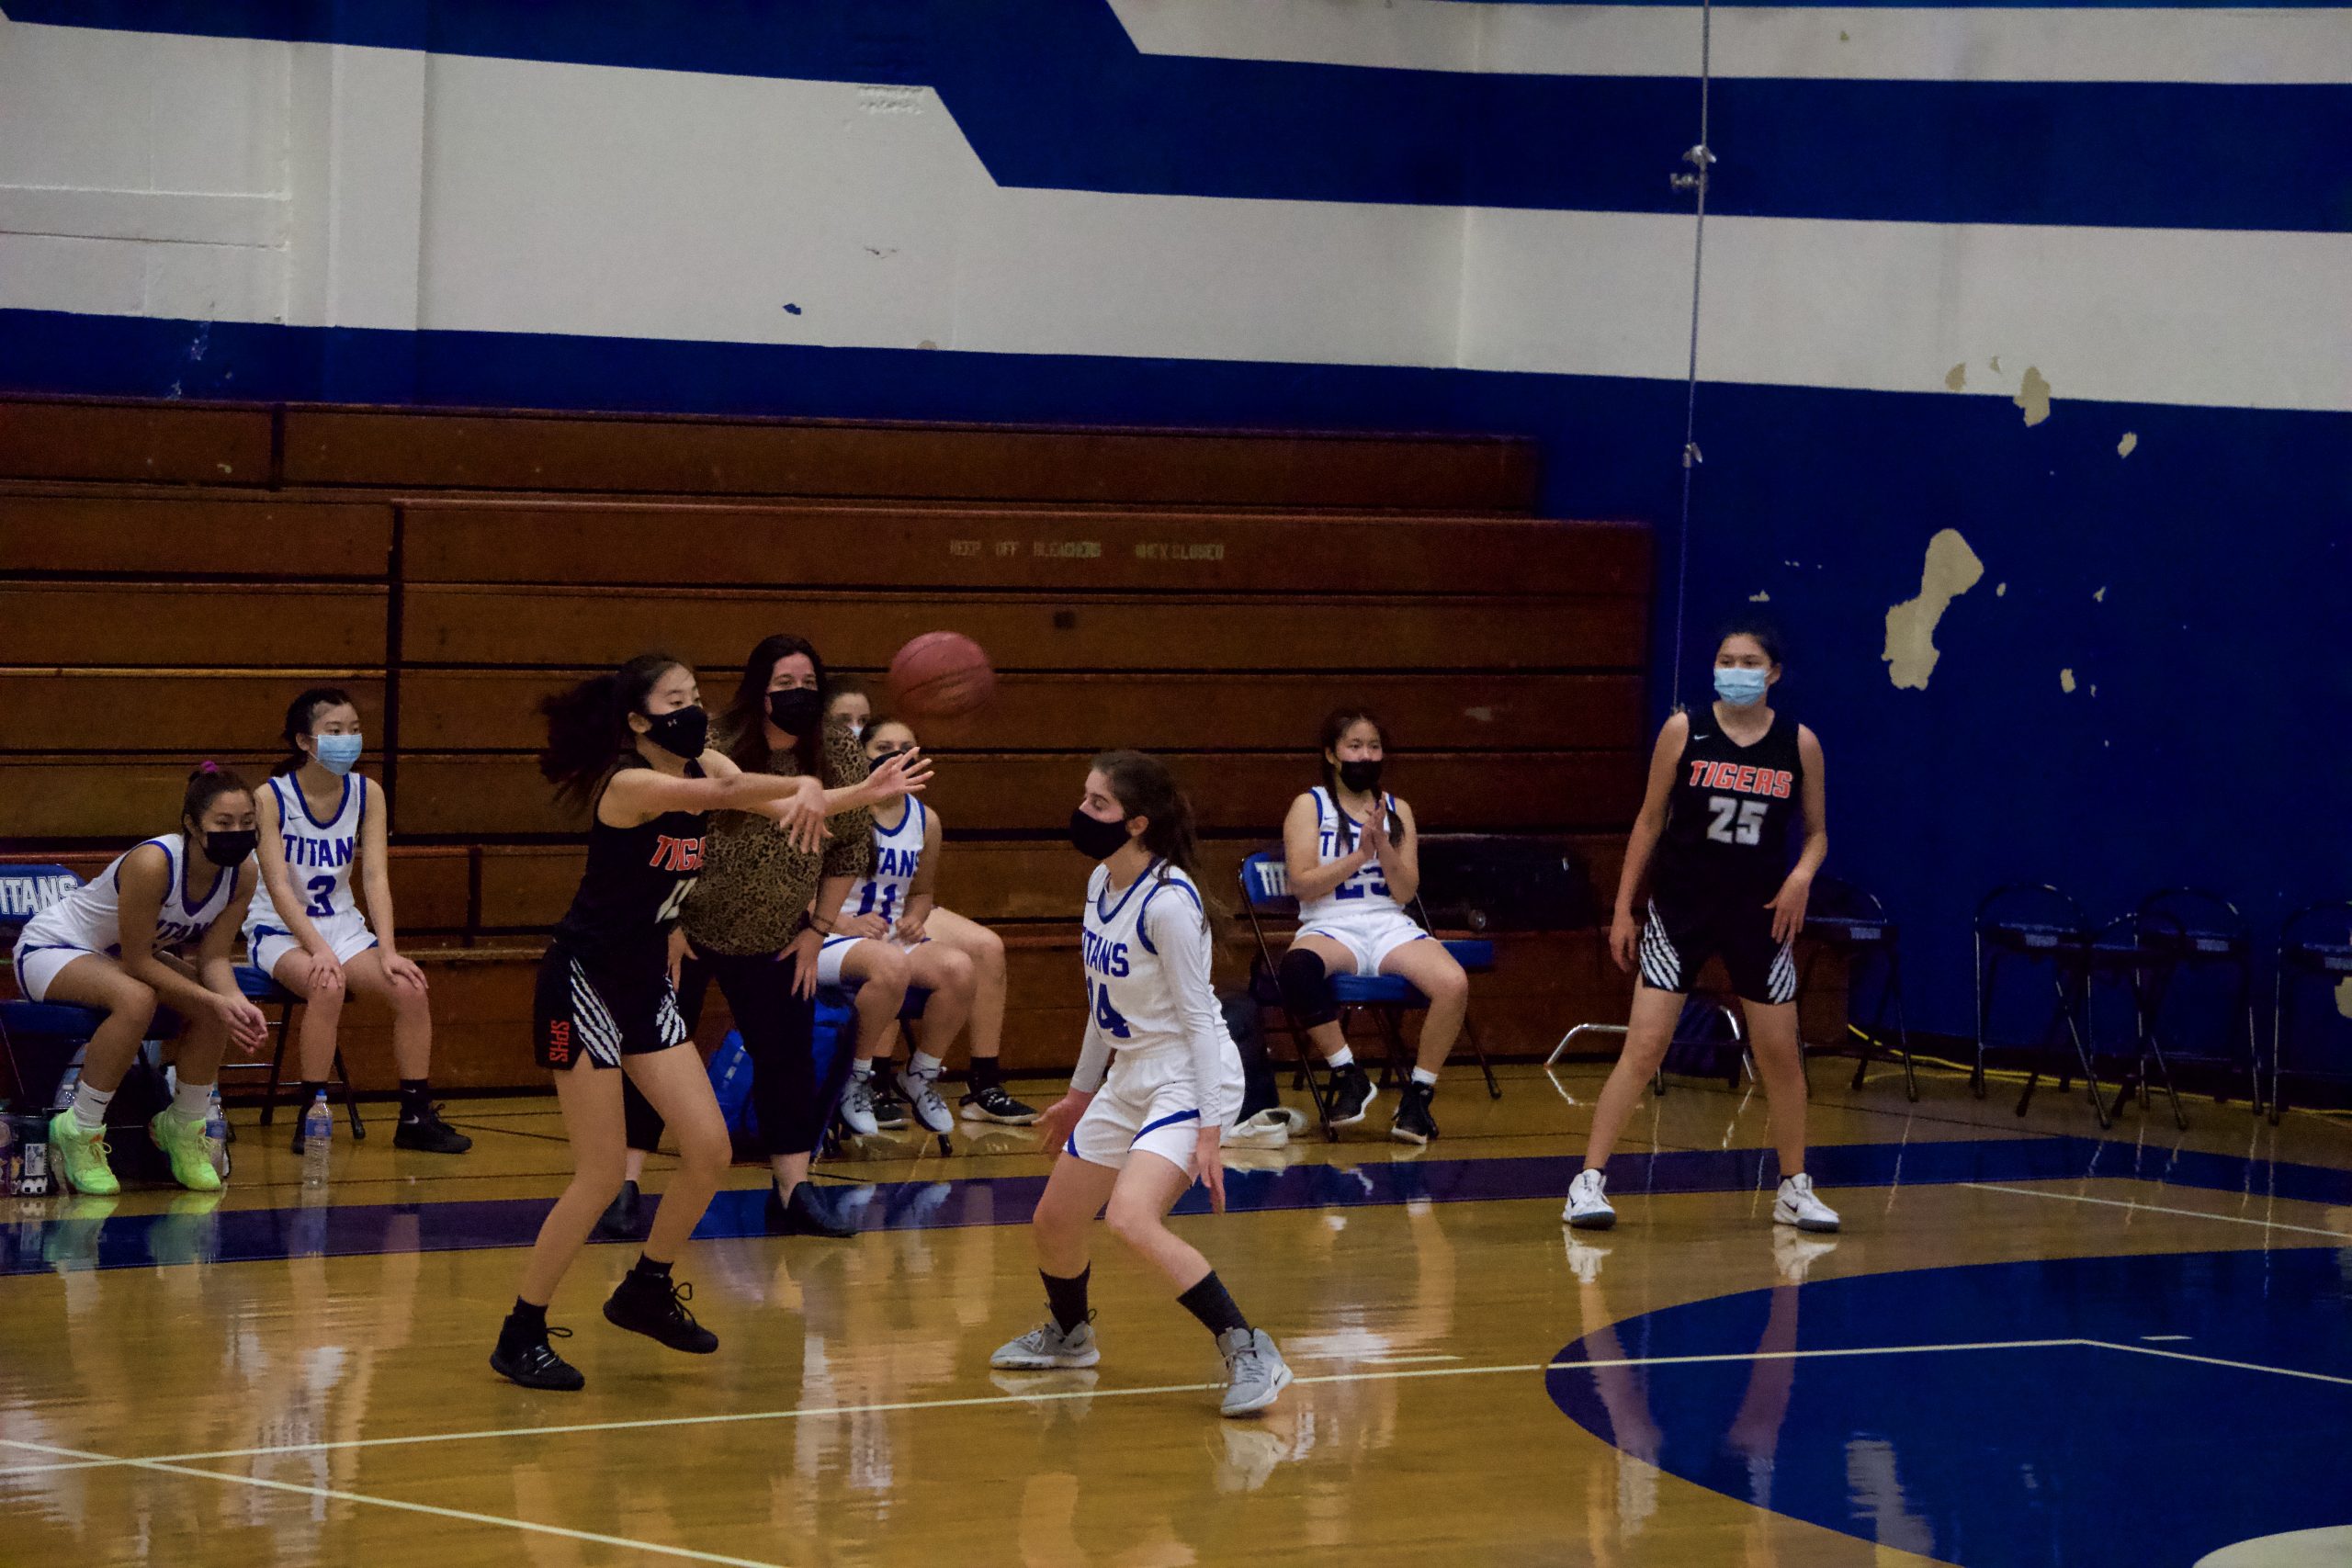 Thumbnail for Girls basketball continues their winning streak with a victory against Monrovia